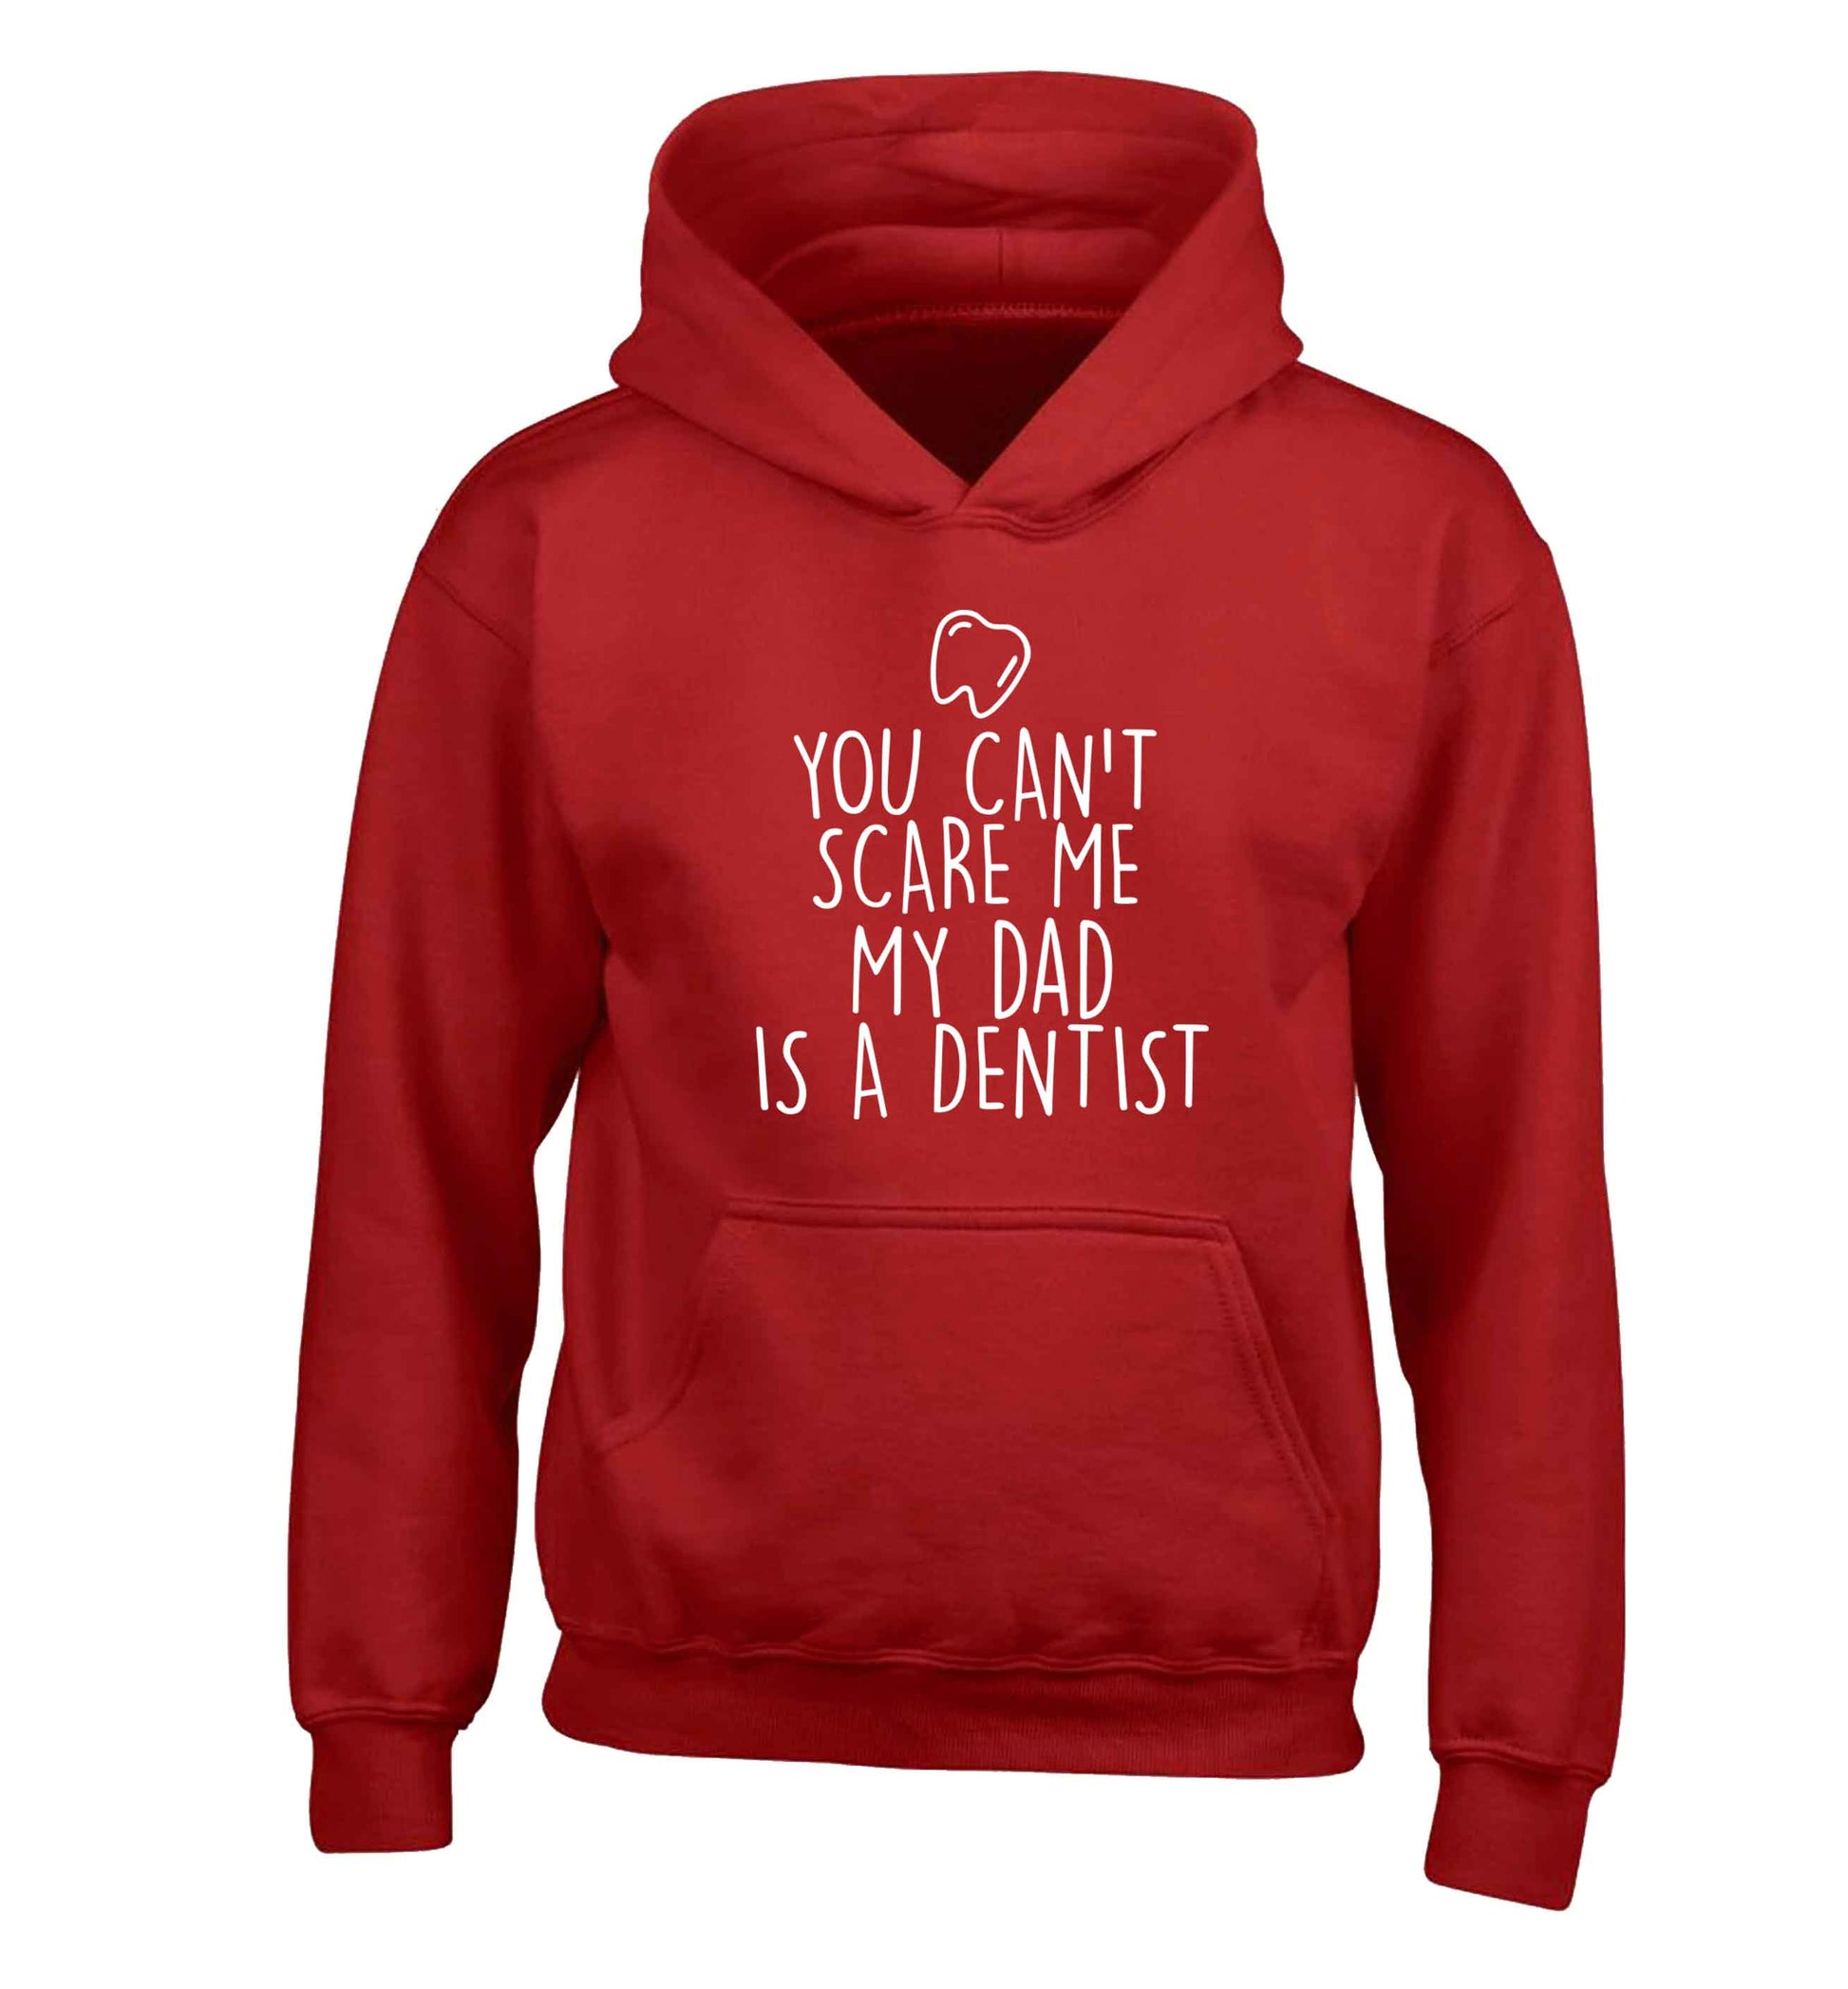 You can't scare me my dad is a dentist children's red hoodie 12-13 Years